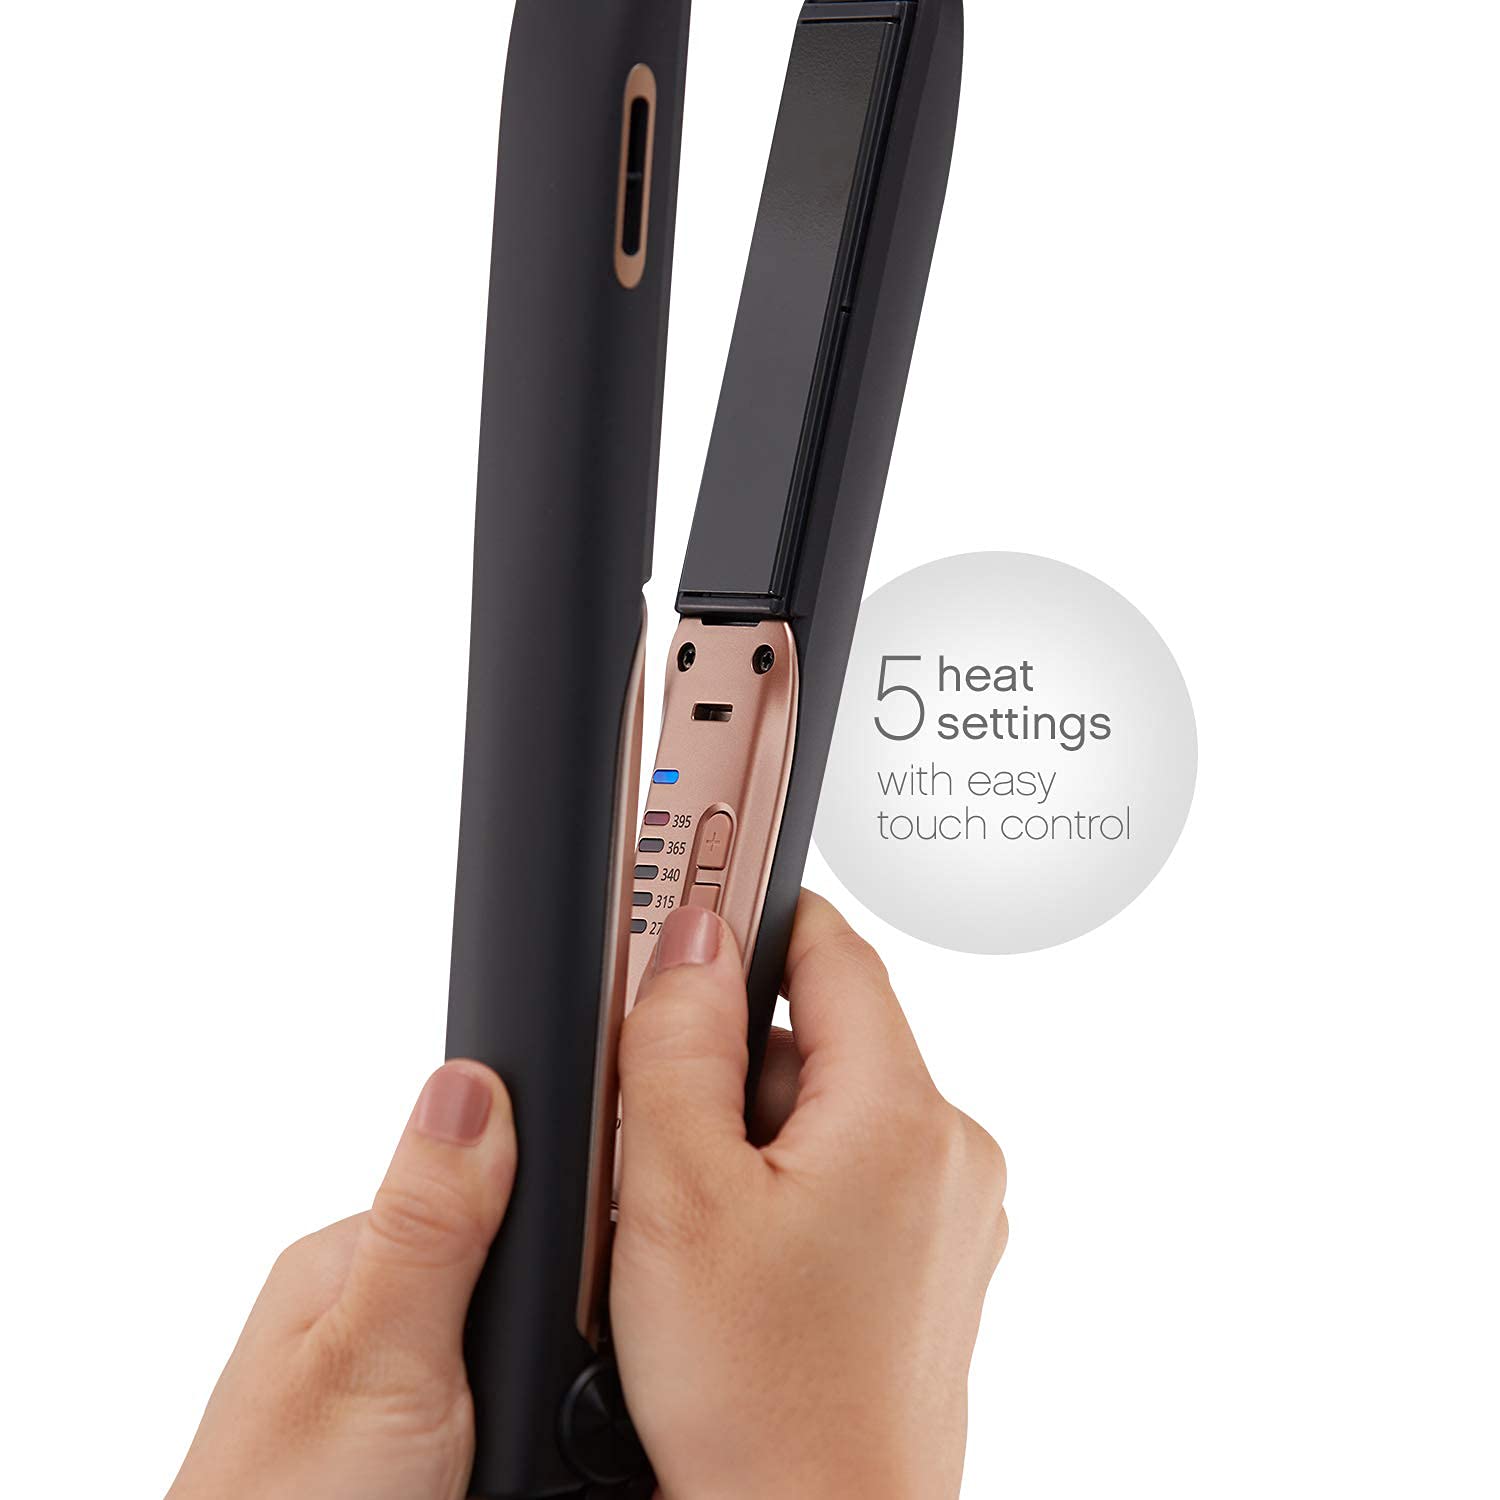 Panasonic nanoe Flat Iron for Healthy, Shiny Hair, Hair Styling Iron with Ceramic Plates and Intuitive Heat Technology, for Straightening, Smoothing and Curling - EH-HS99-K (Black/Rose Gold) : Beauty & Personal Care